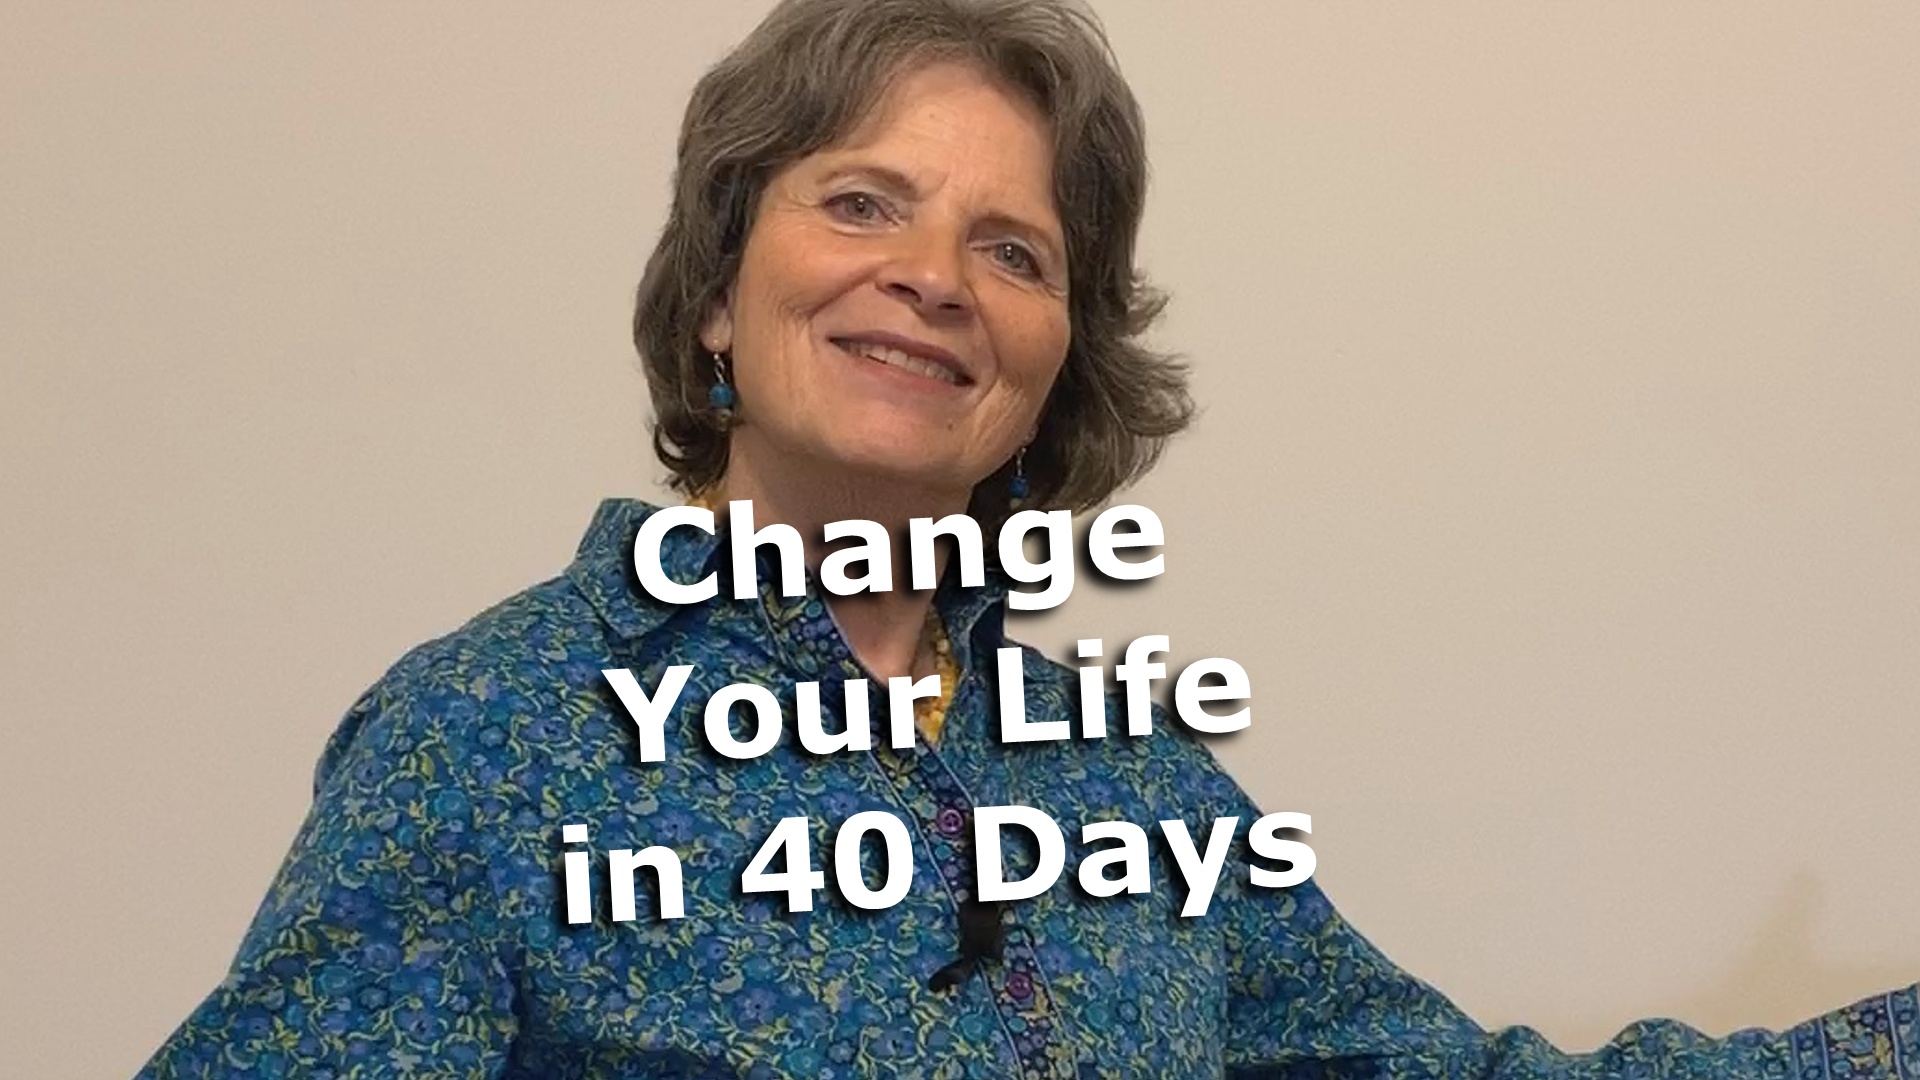 Change Your Life in 40 Days